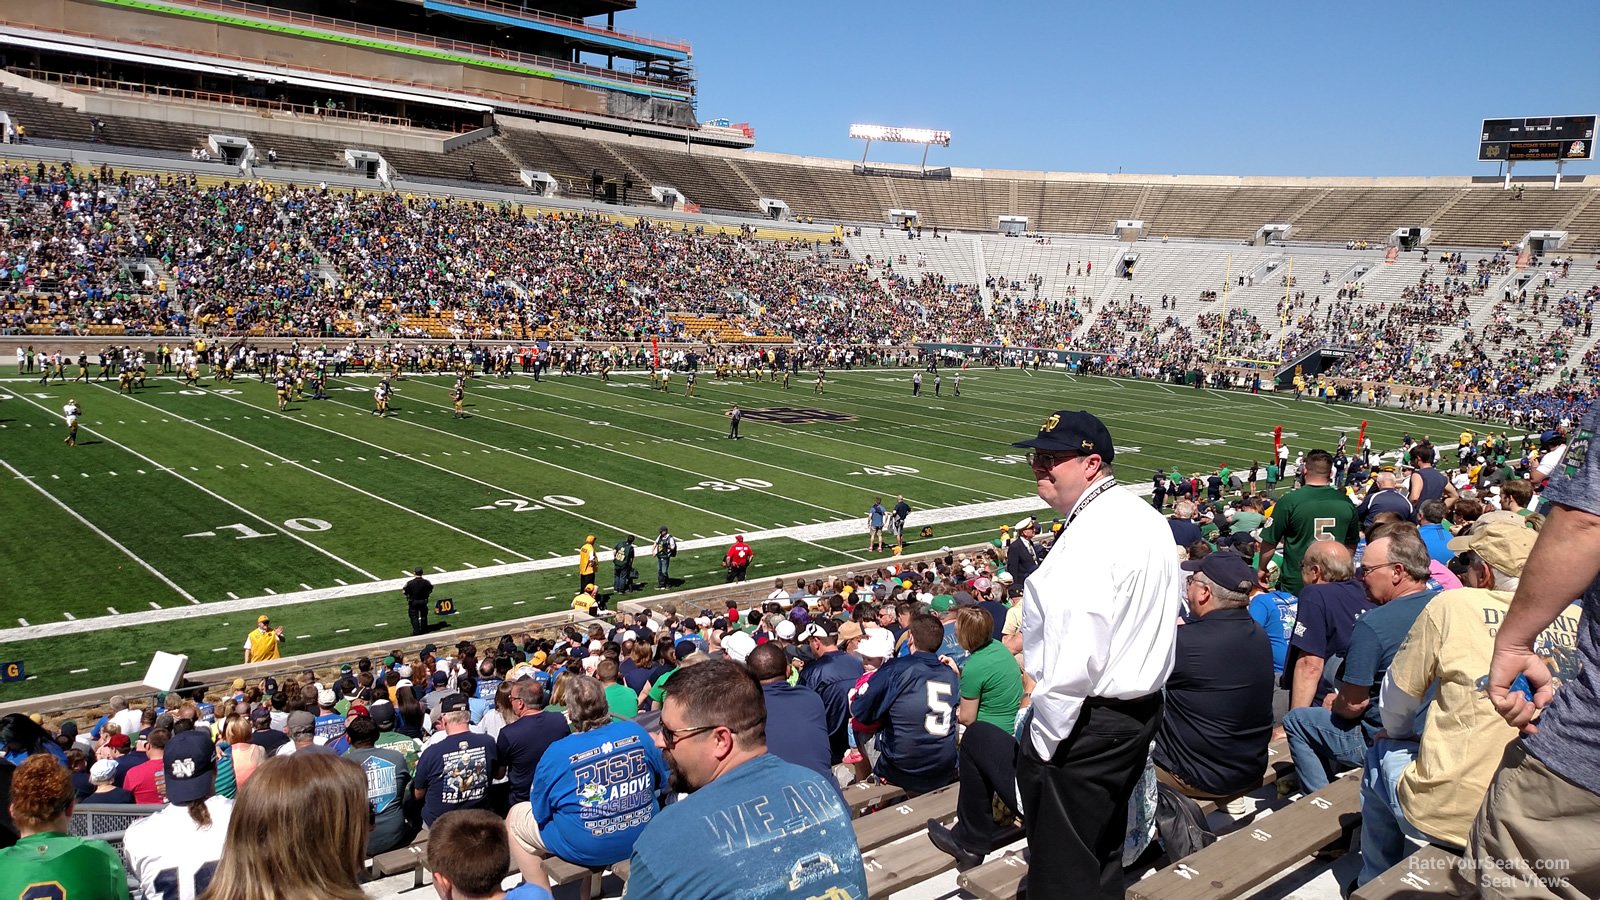 section 13, row 35 seat view  - notre dame stadium